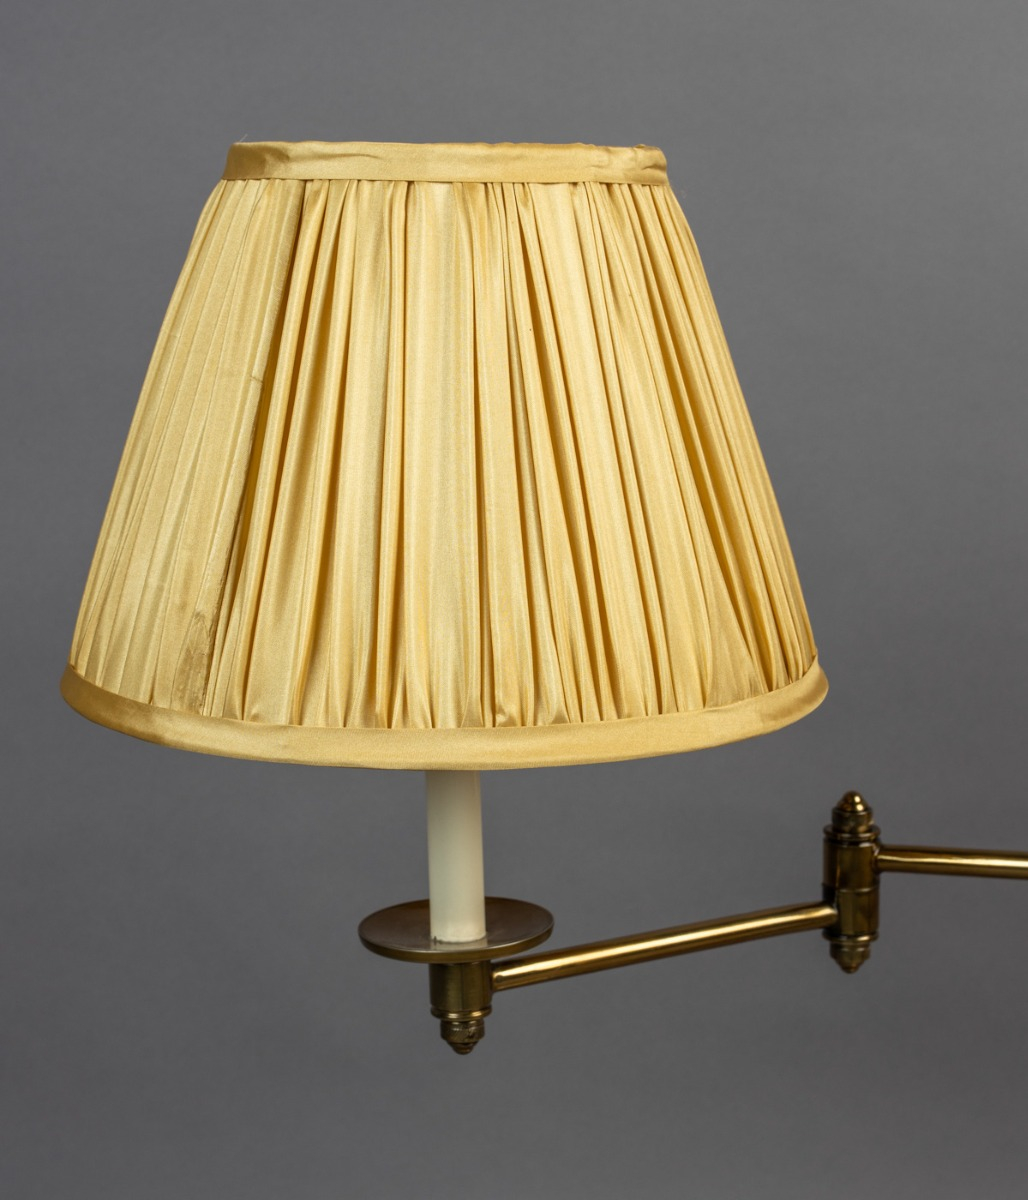 The Allis Table Lamp